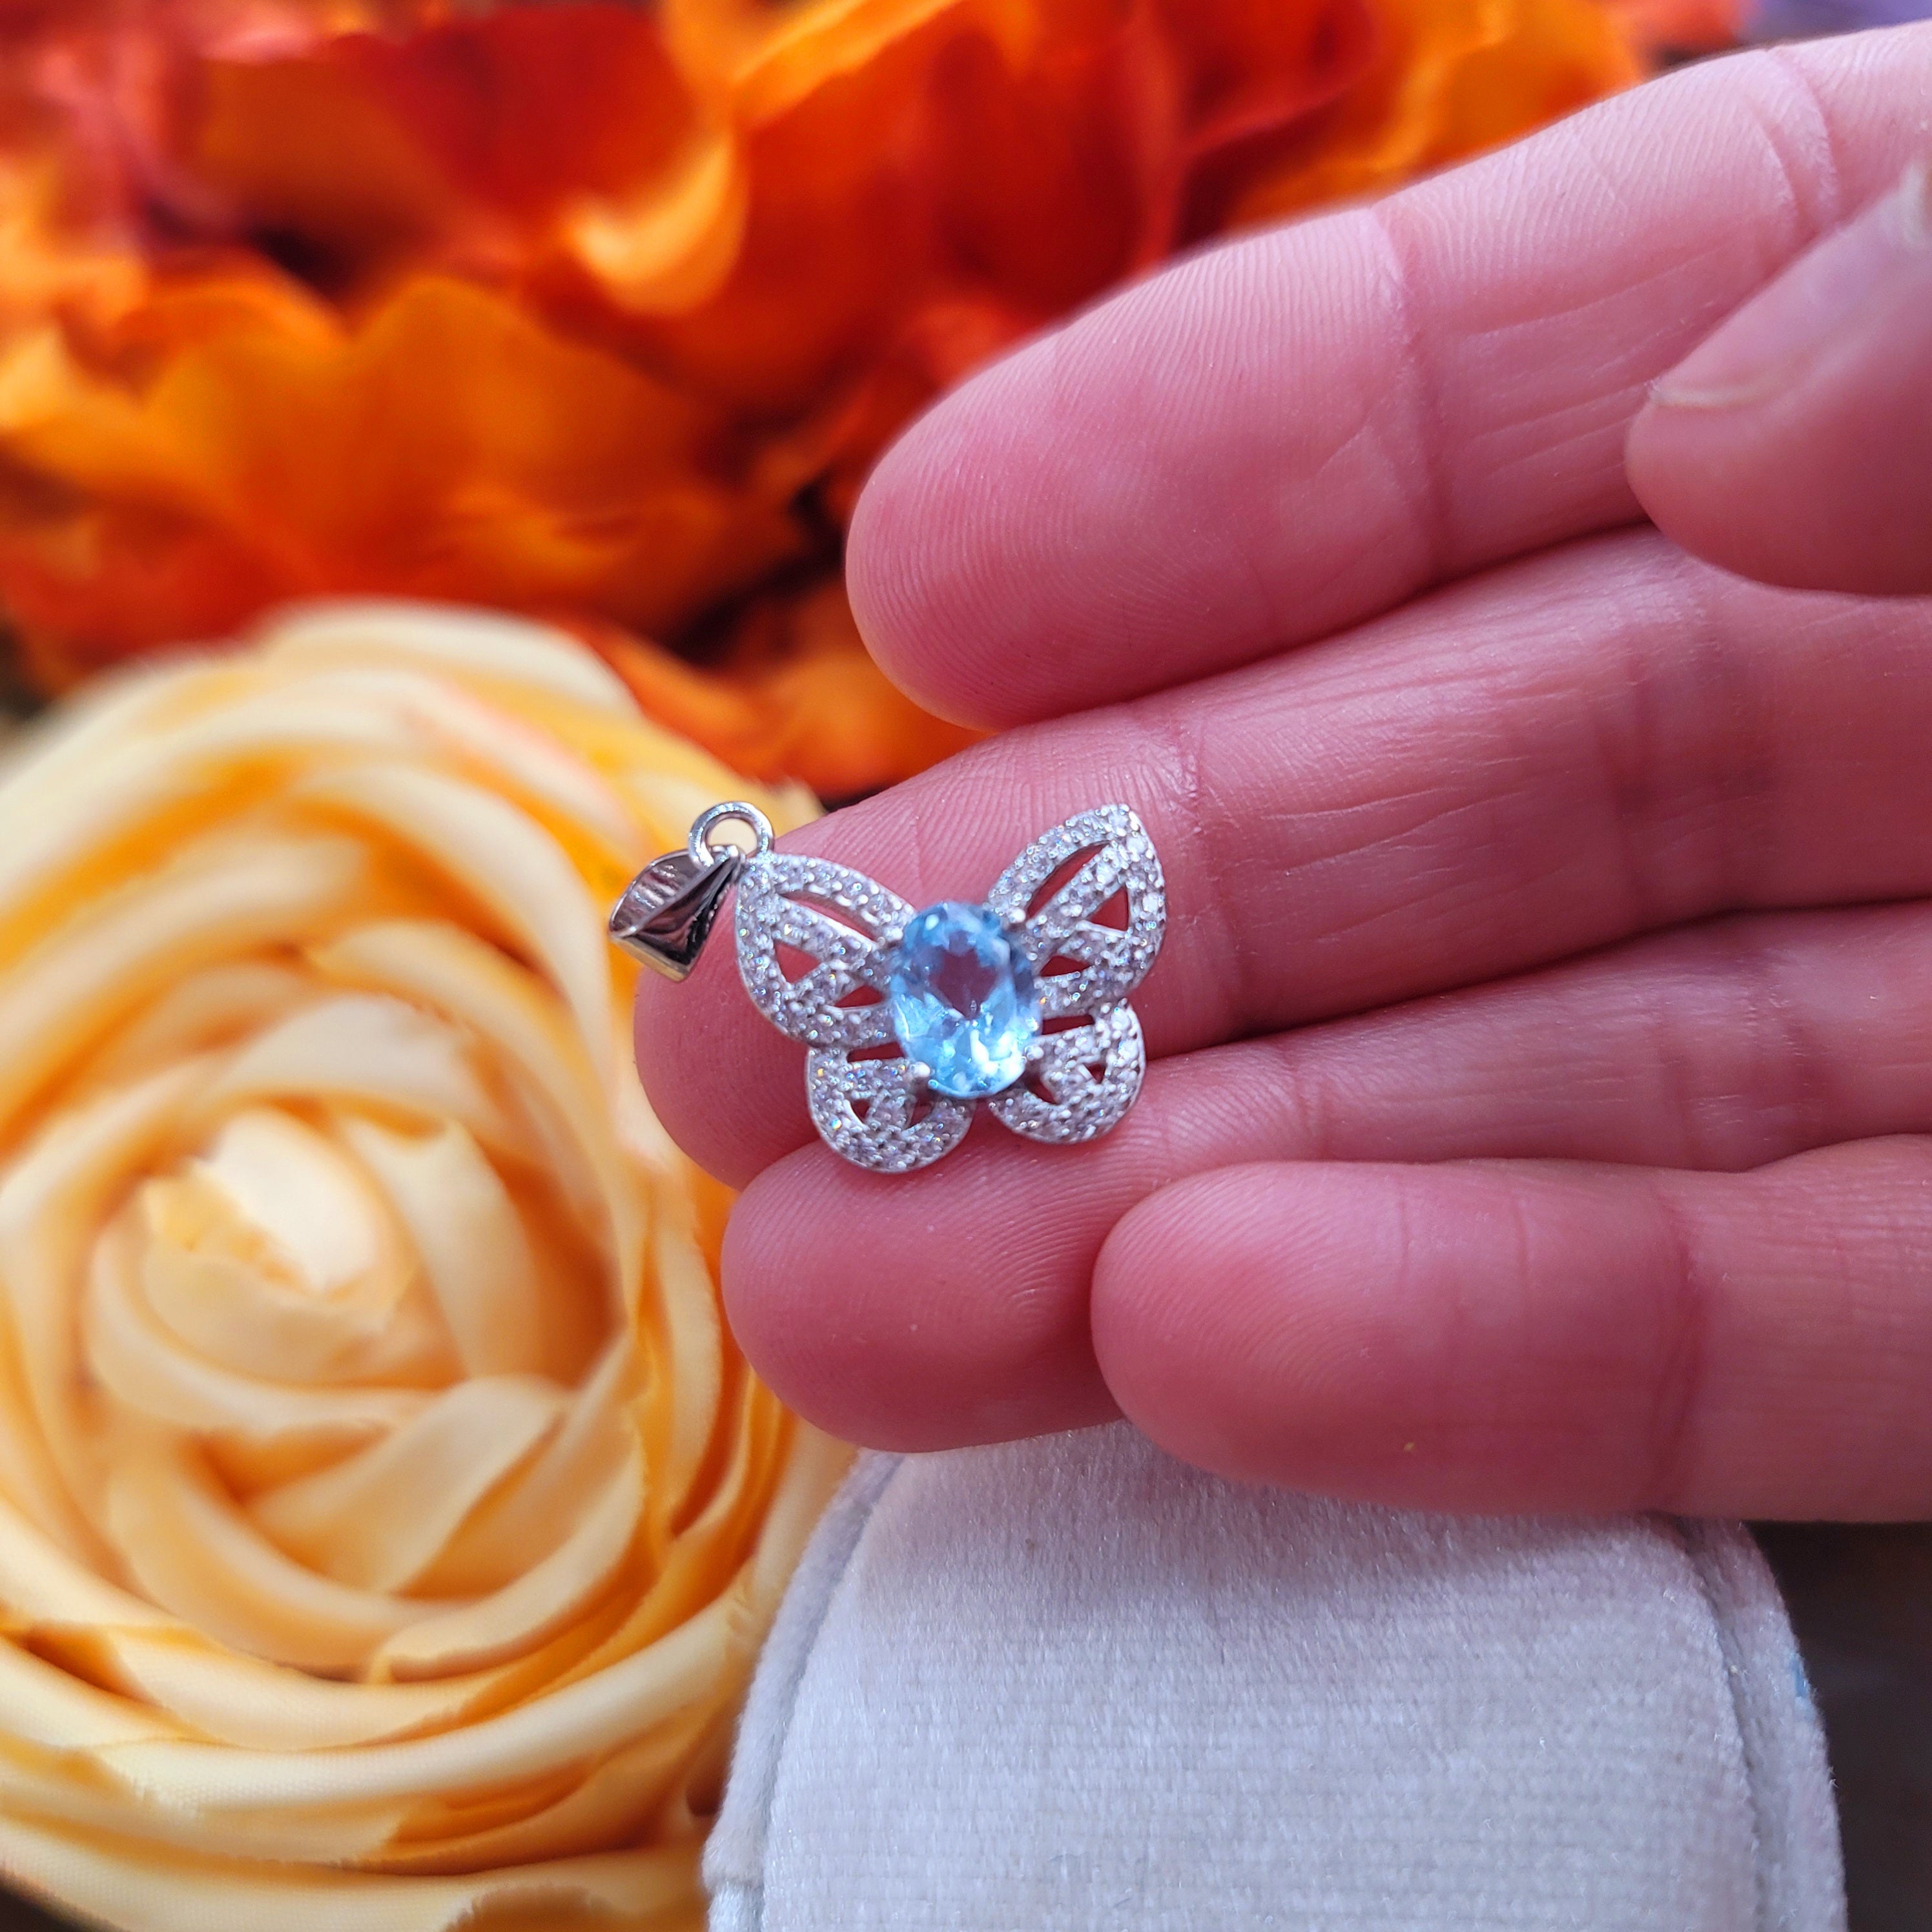 Blue Topaz Magestic Butterfly Pendant for Awareness, Communication and Opportunities